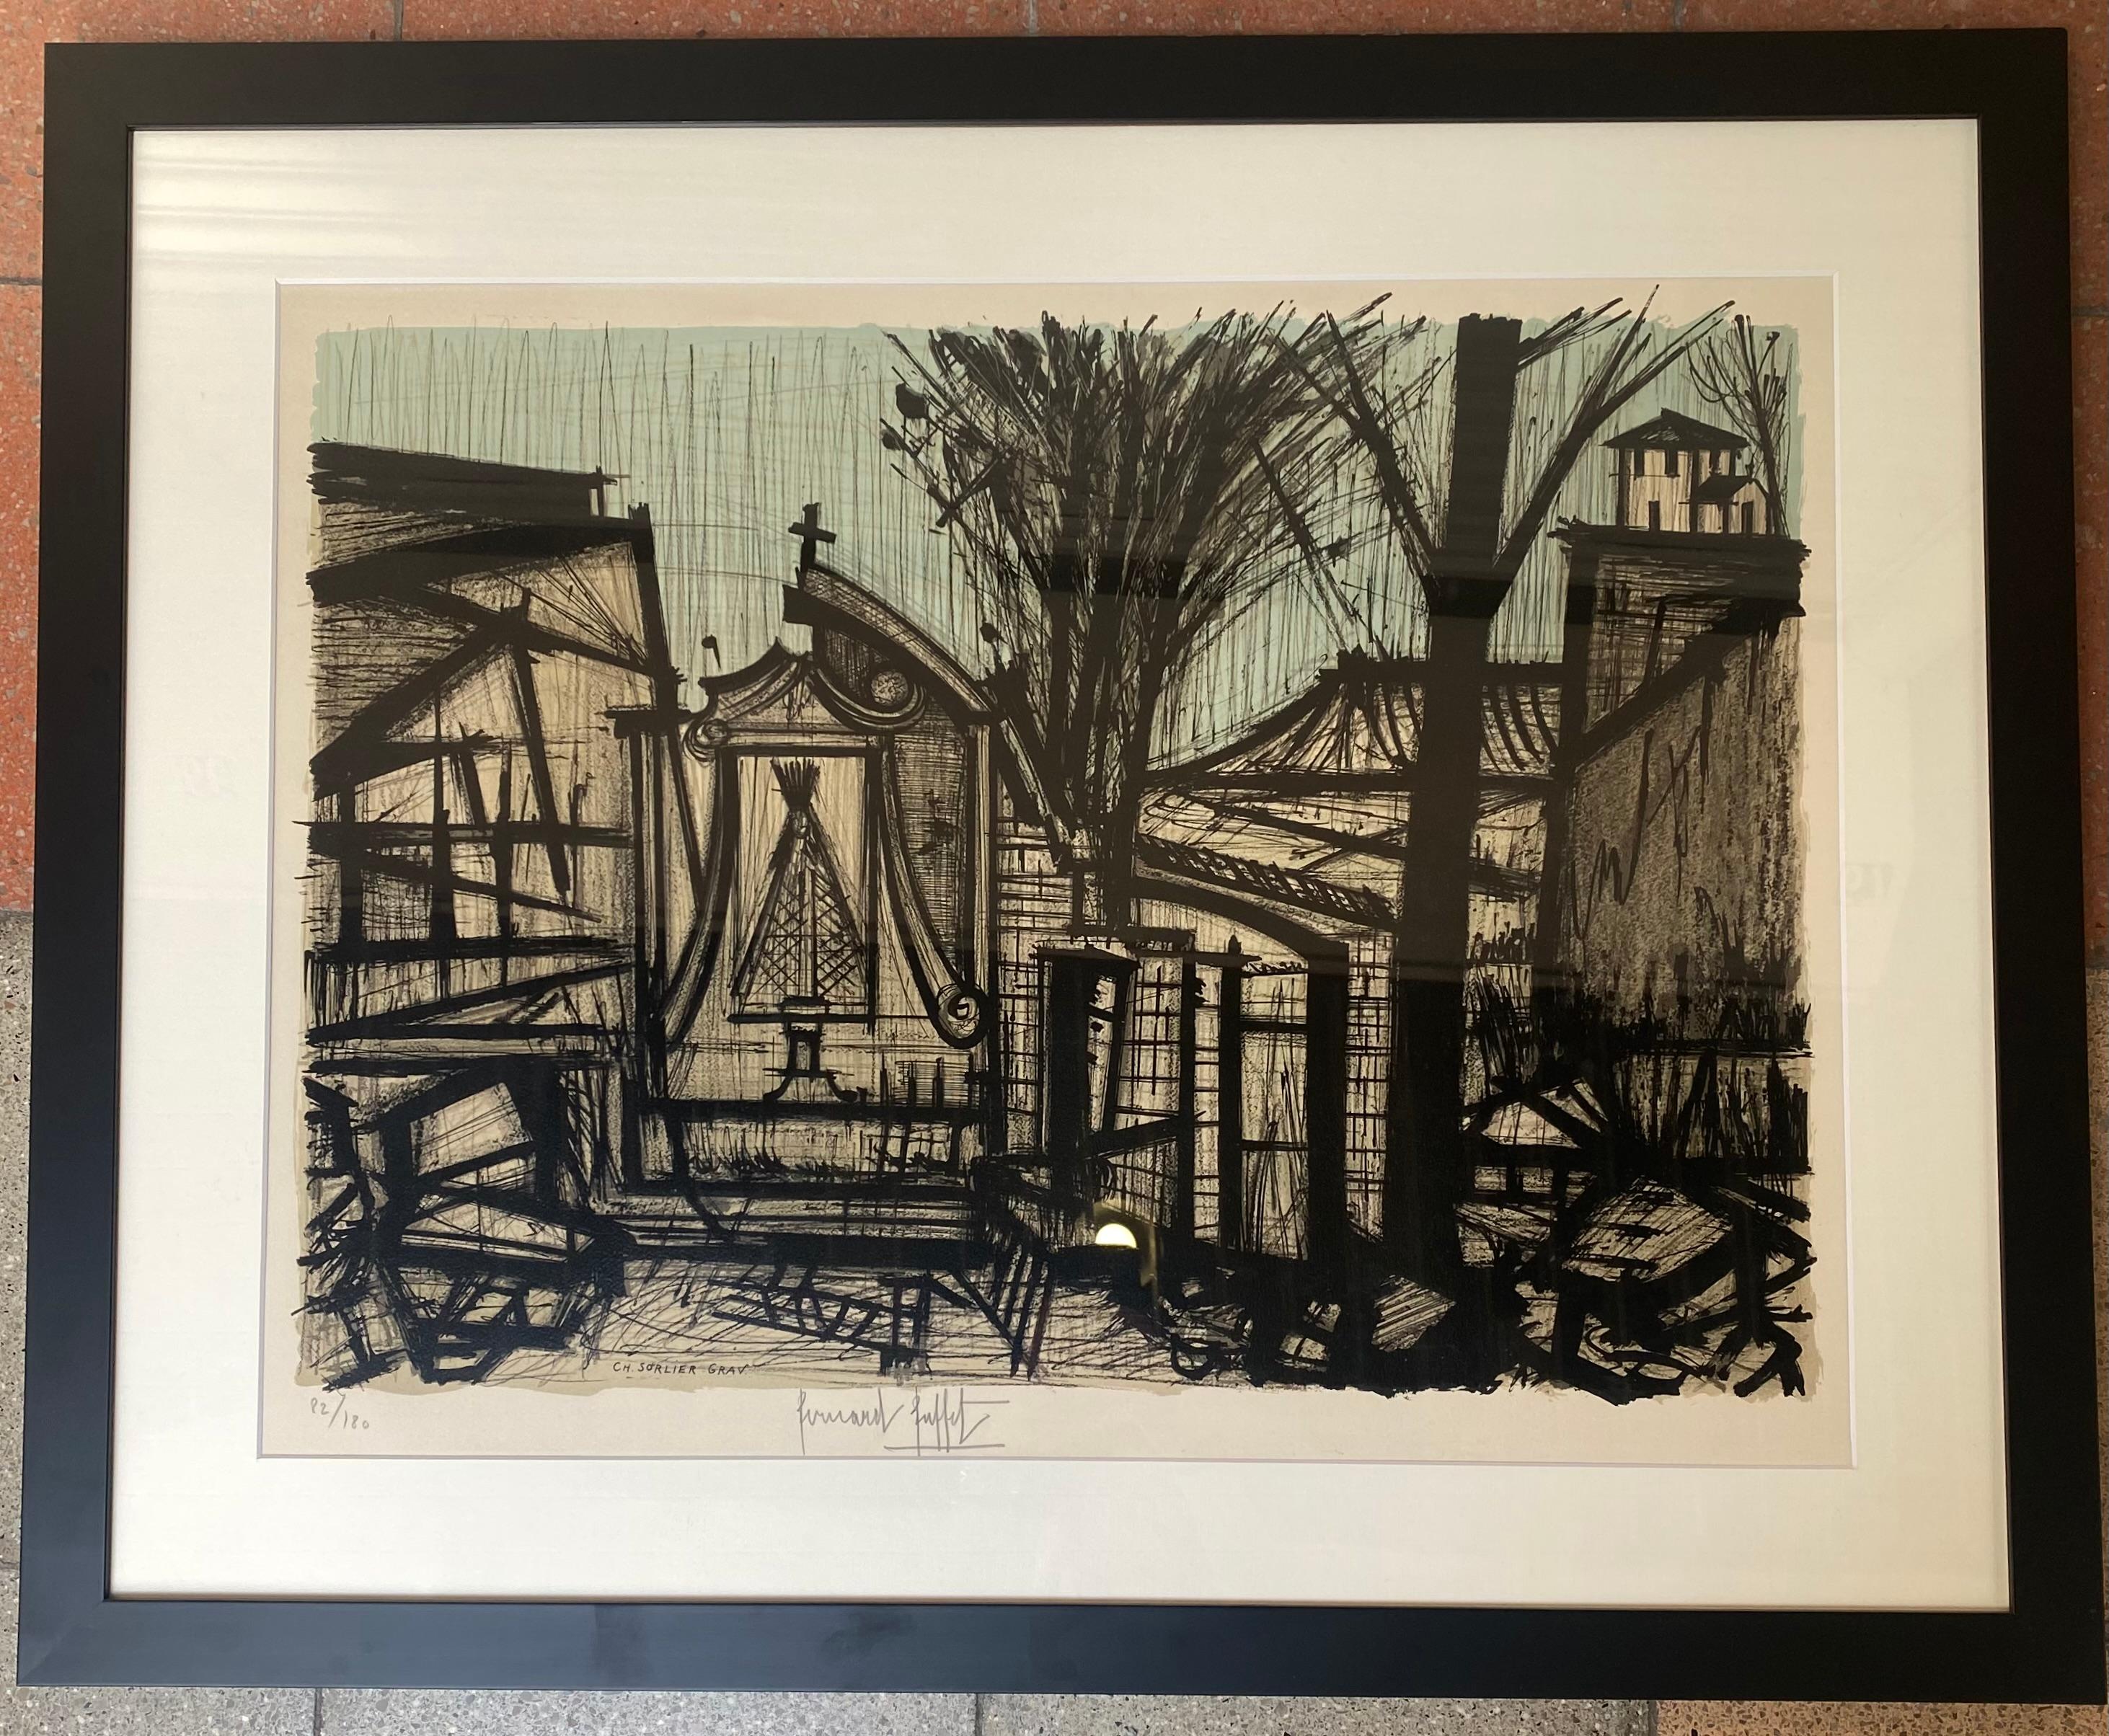 Bernard Buffet - In the mountains. 
Colour lithograph on paper.
Made by Charles Sorlier engraver. 
Signed lower middle and numbered lower left 82/100.
Size lithograph : length 72cm, width 55cm.
Size lithograph with frame : length 93,5cm, width